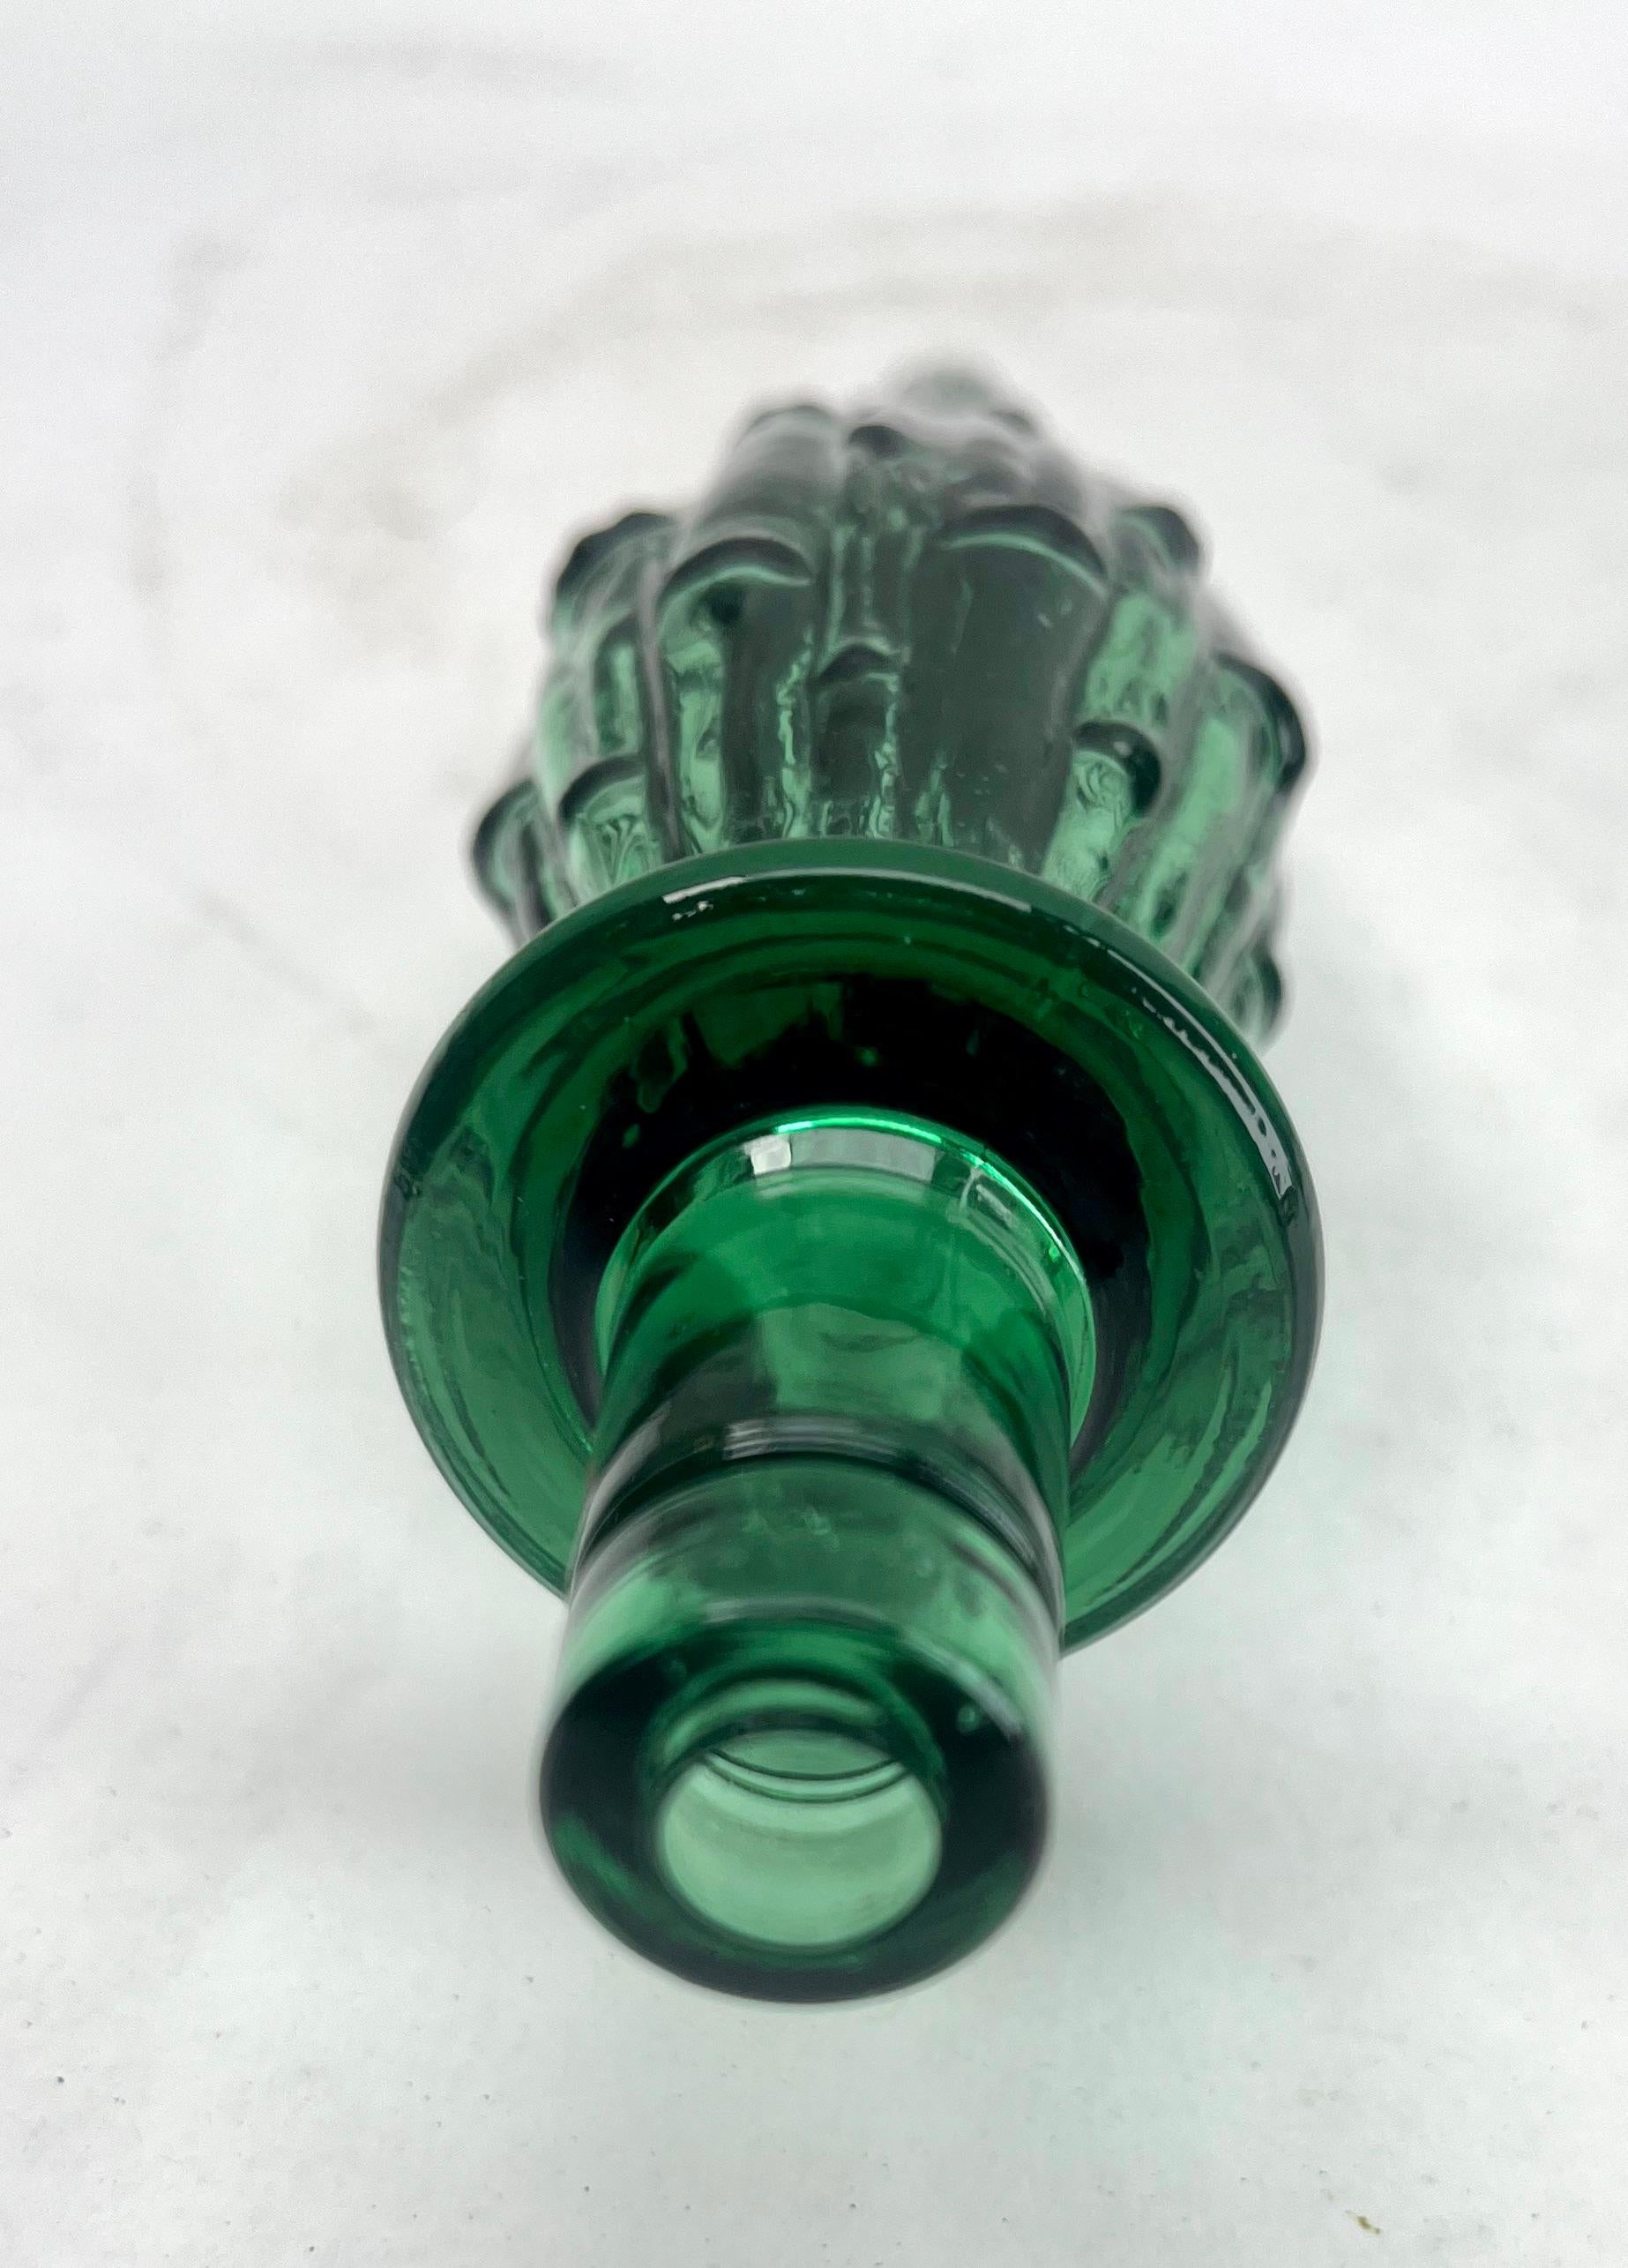 Italian Empoli Geniebottle Green Art Glass from the Mid-20th Century For Sale 3